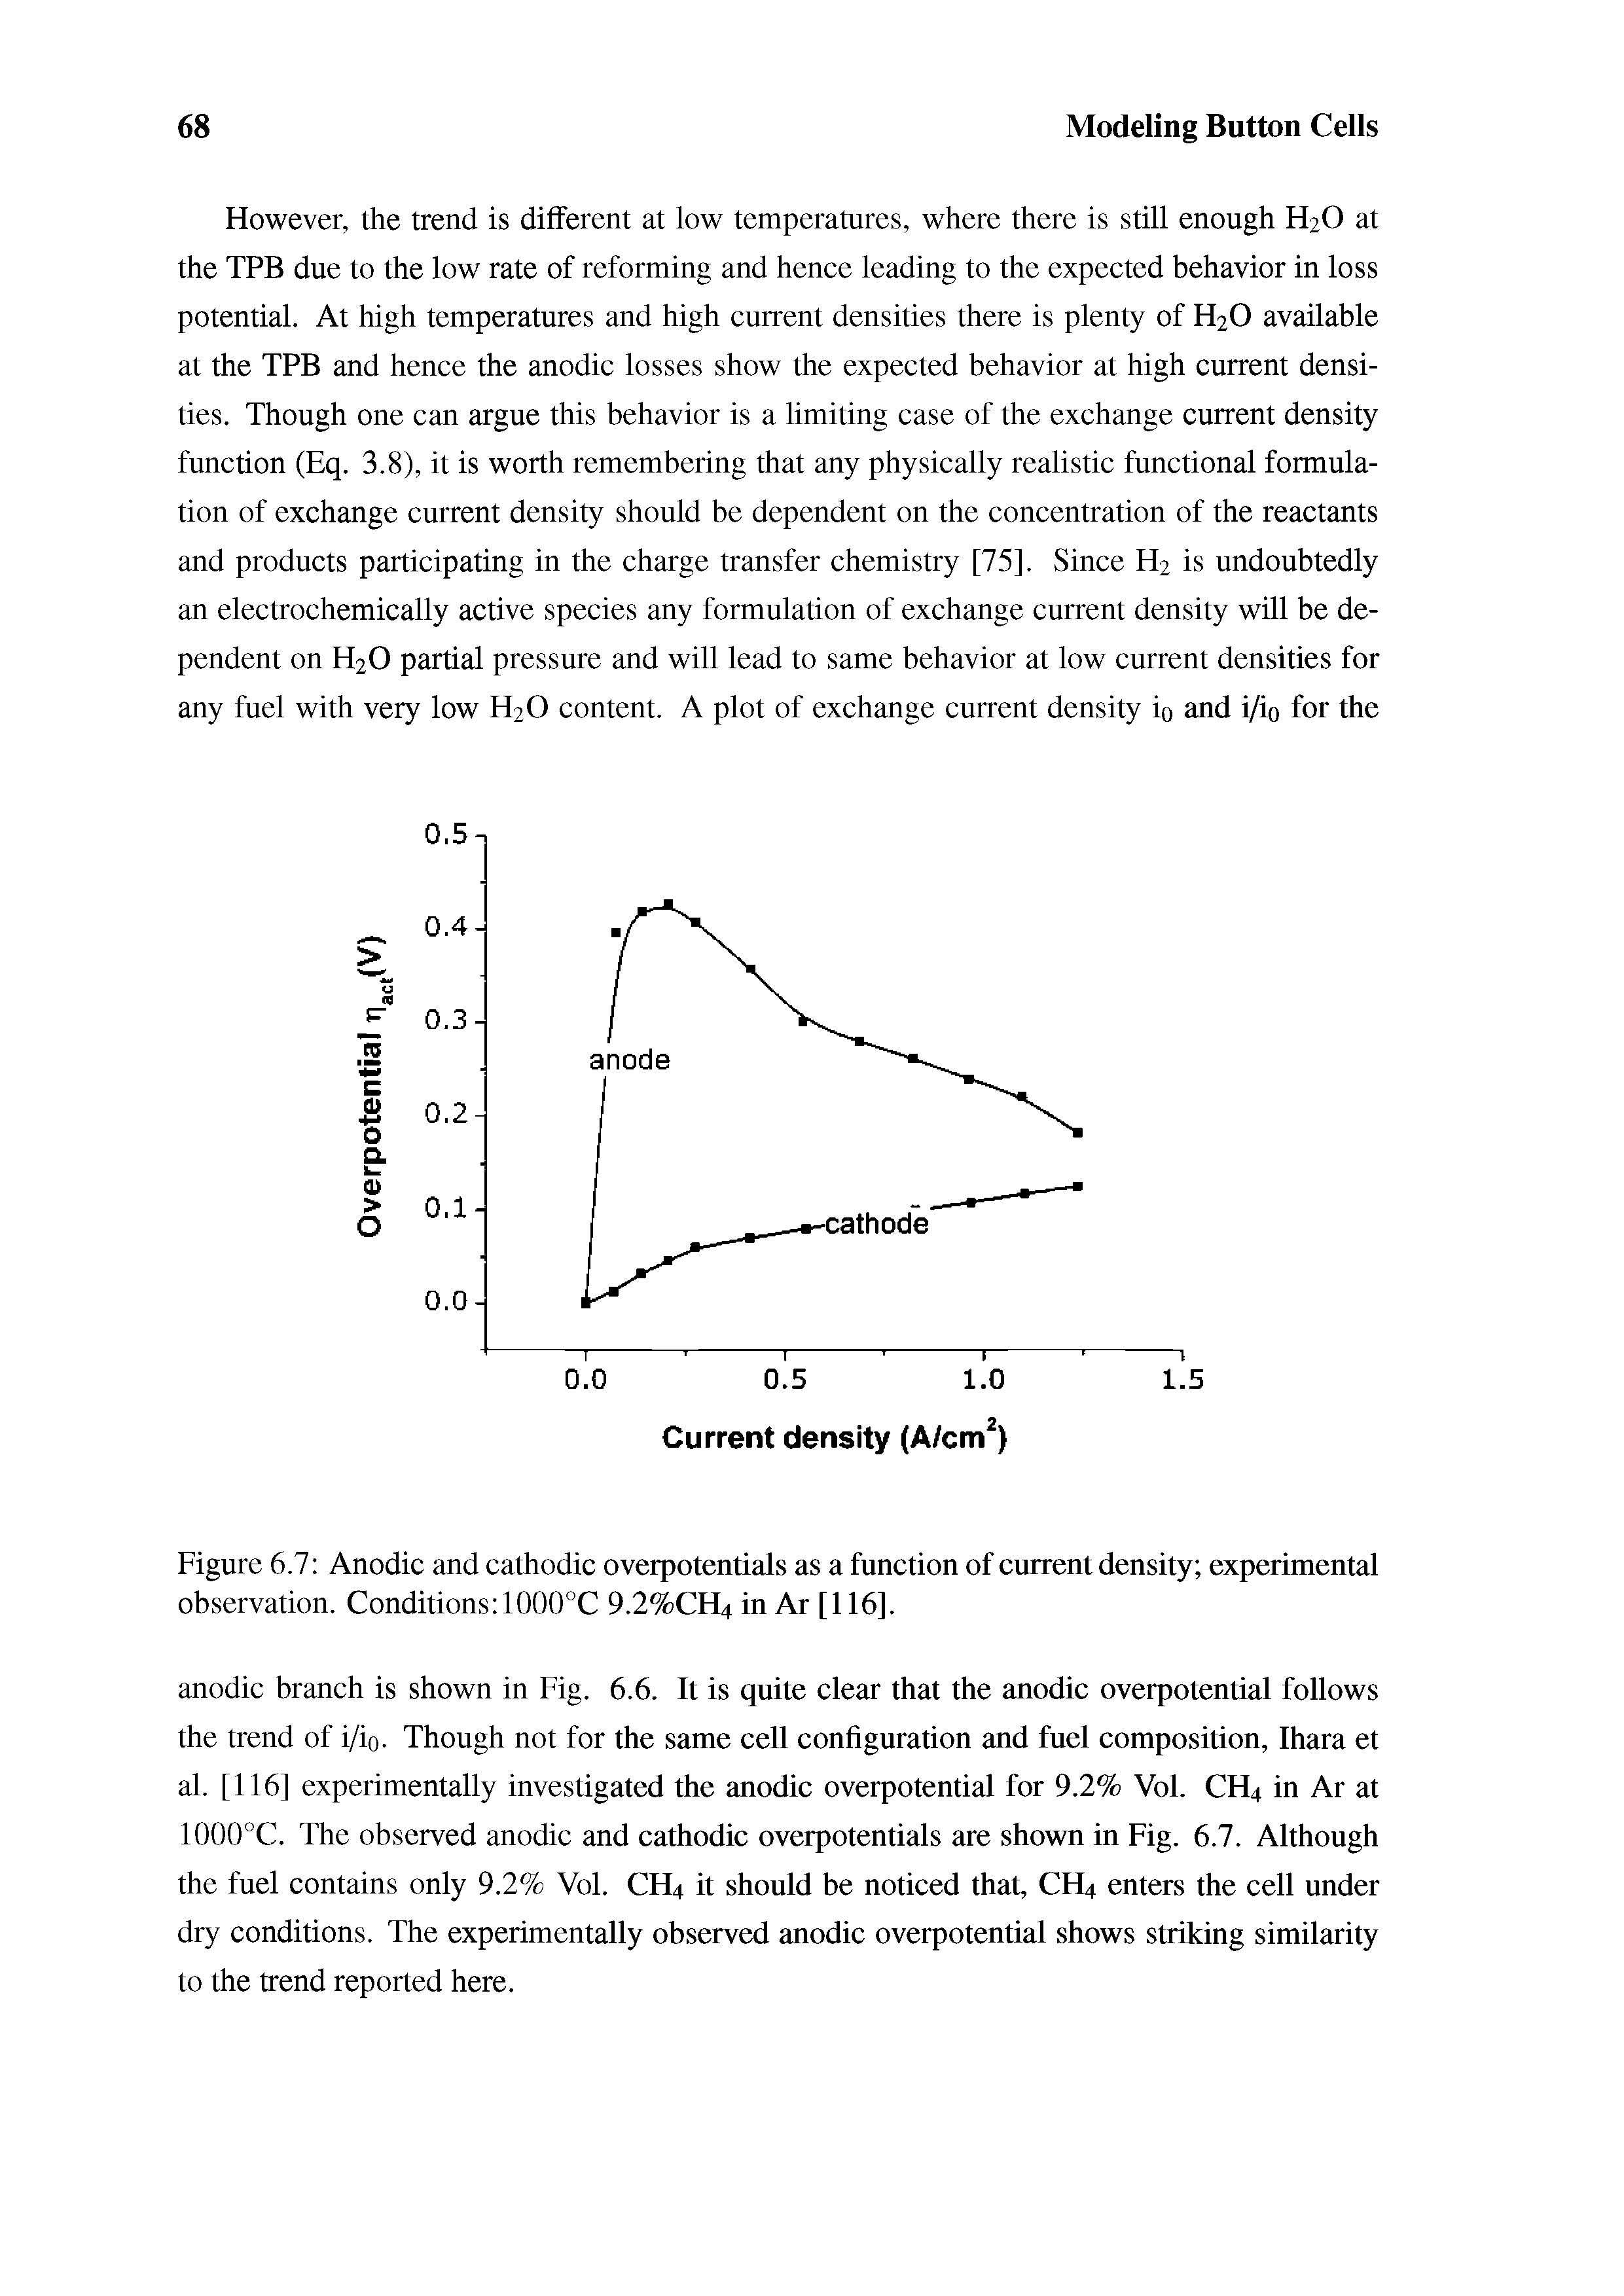 Figure 6.7 Anodic and cathodic overpotentials as a function of current density experimental observation. Conditions 1000°C 9.2%CH4 in Ar [116].